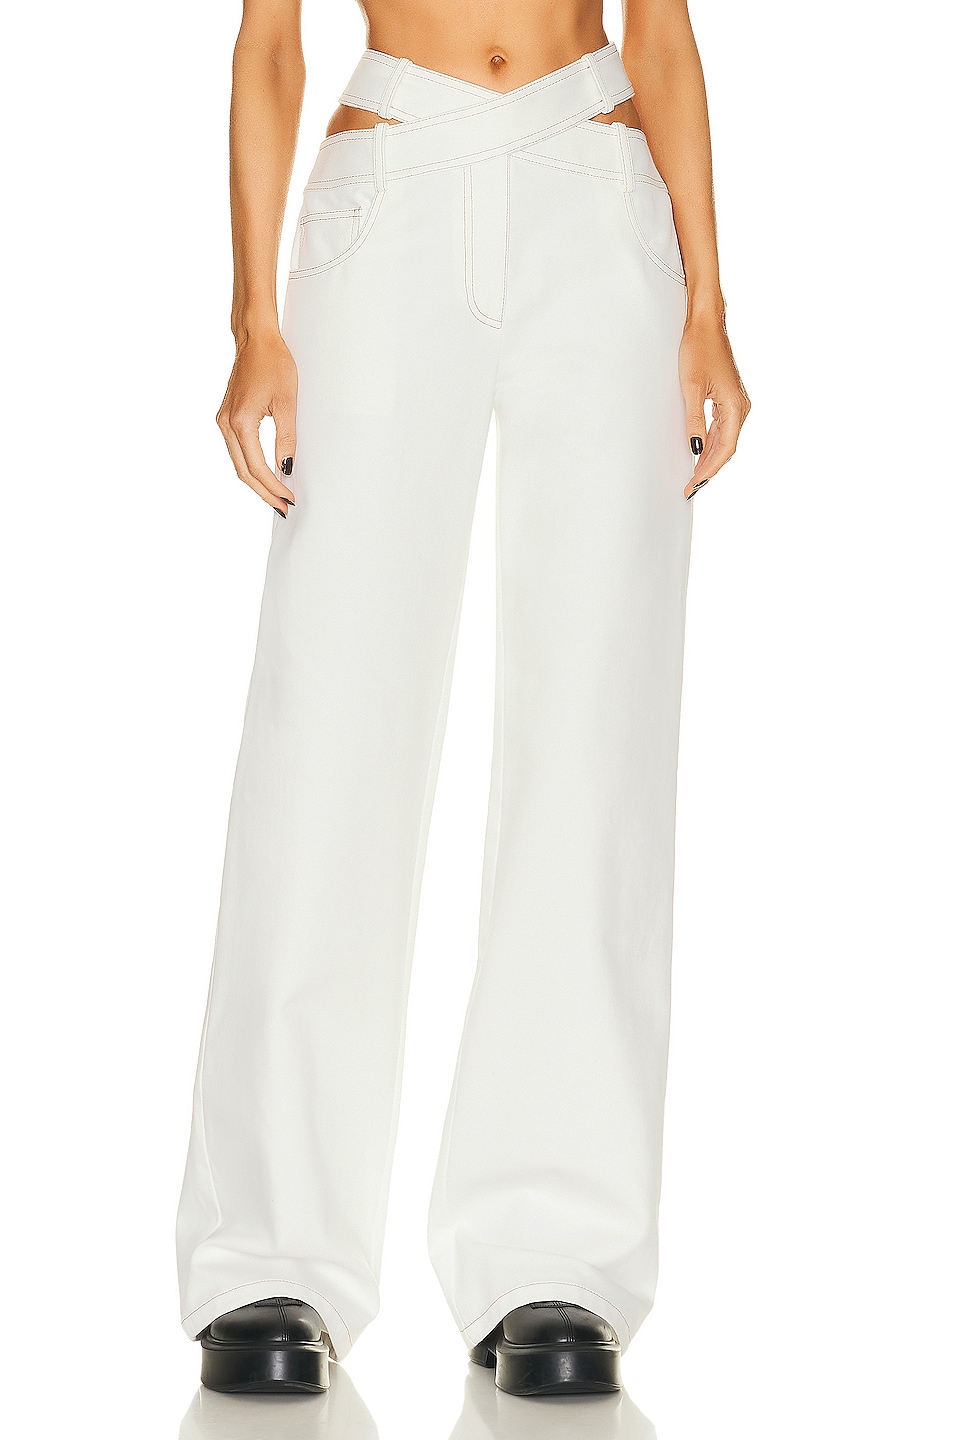 Image 1 of Monse Criss Cross Waistband Pant in White